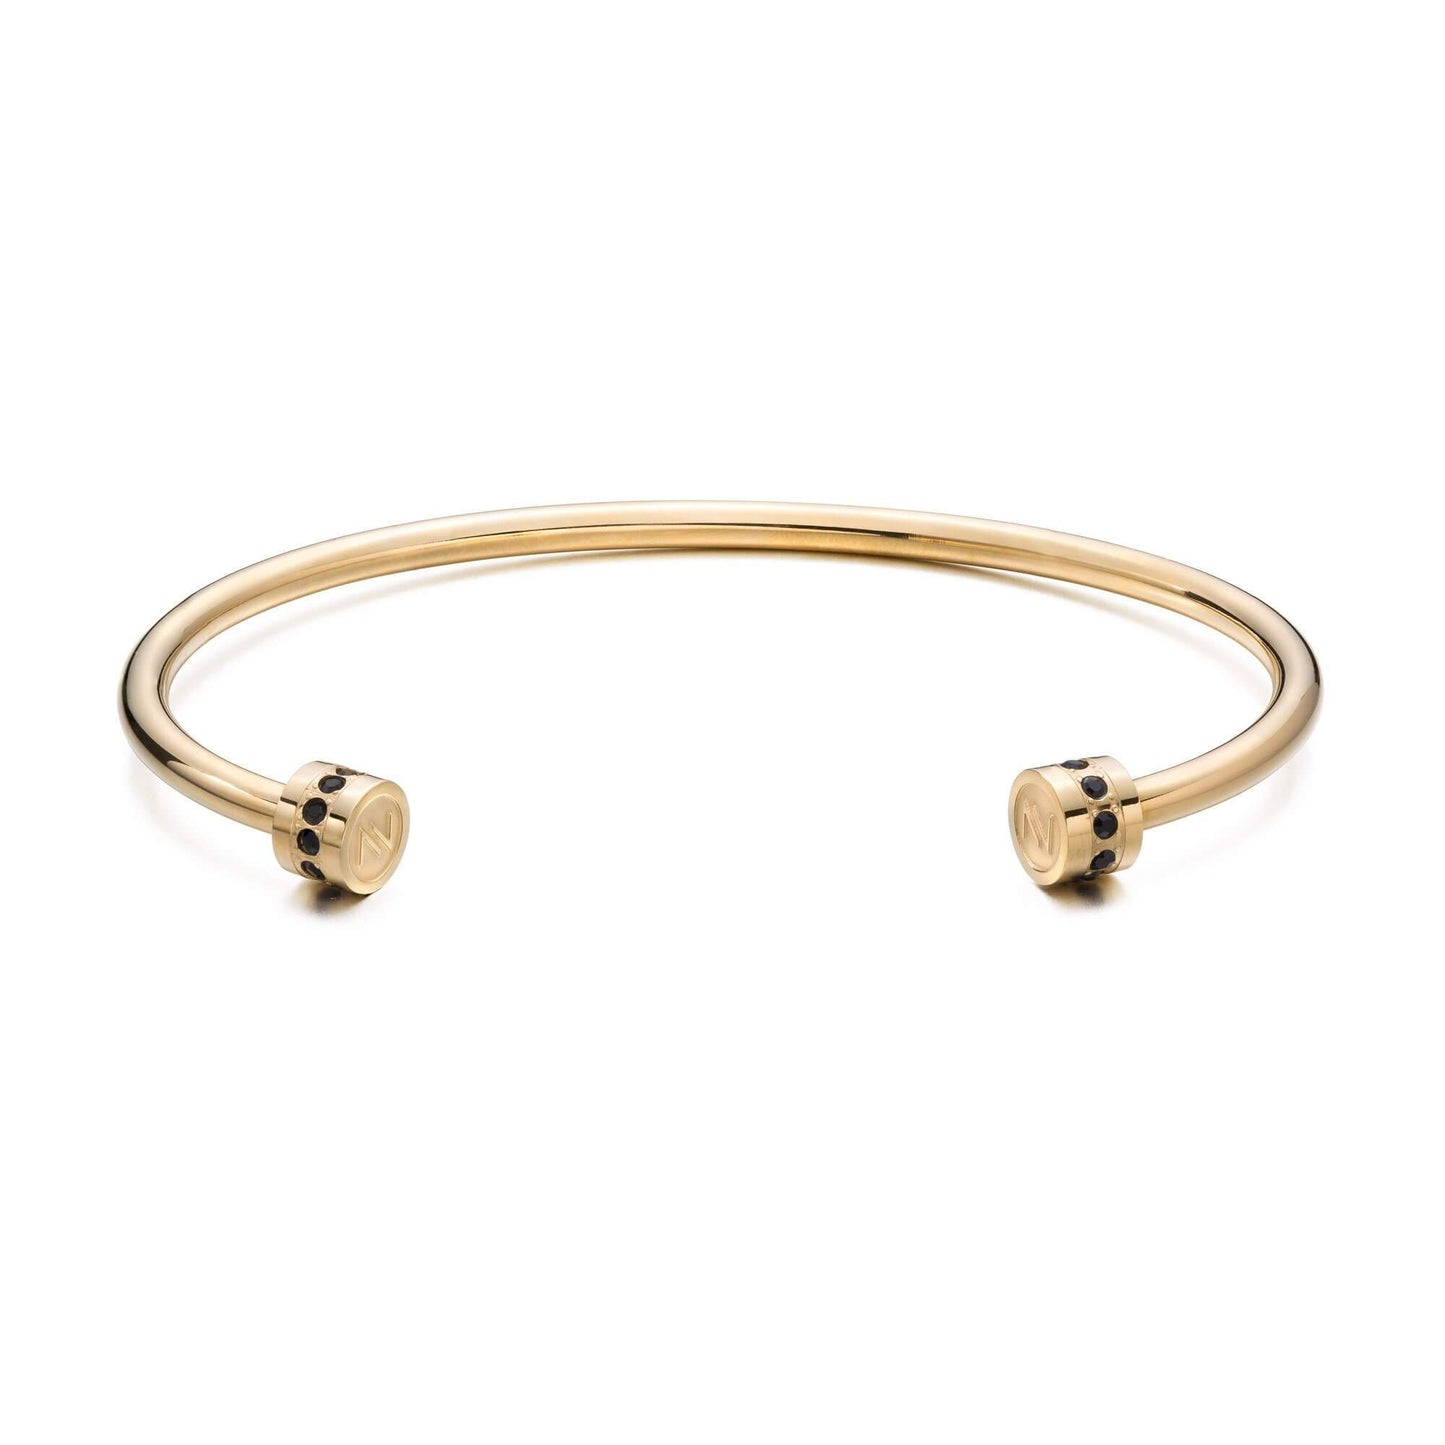 The classic Z bangle - Gold